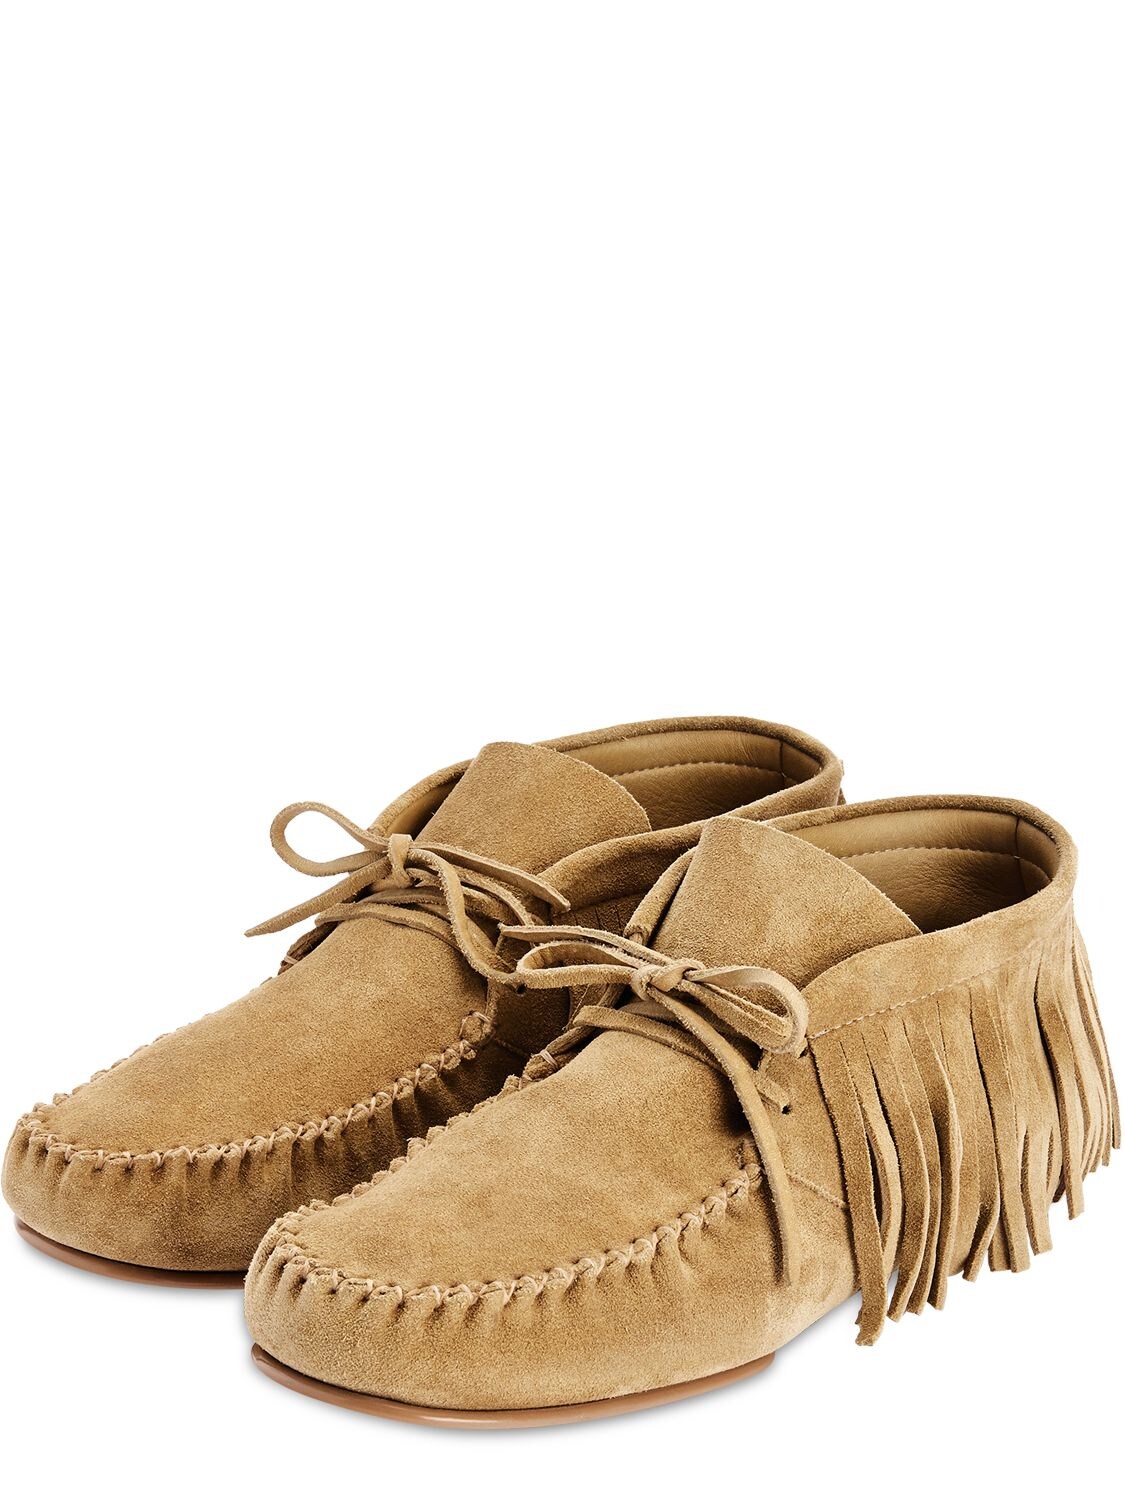 LOEWE FRINGED HIGH TOP SUEDE LOAFERS,73IDWJ002-ODEZMA2